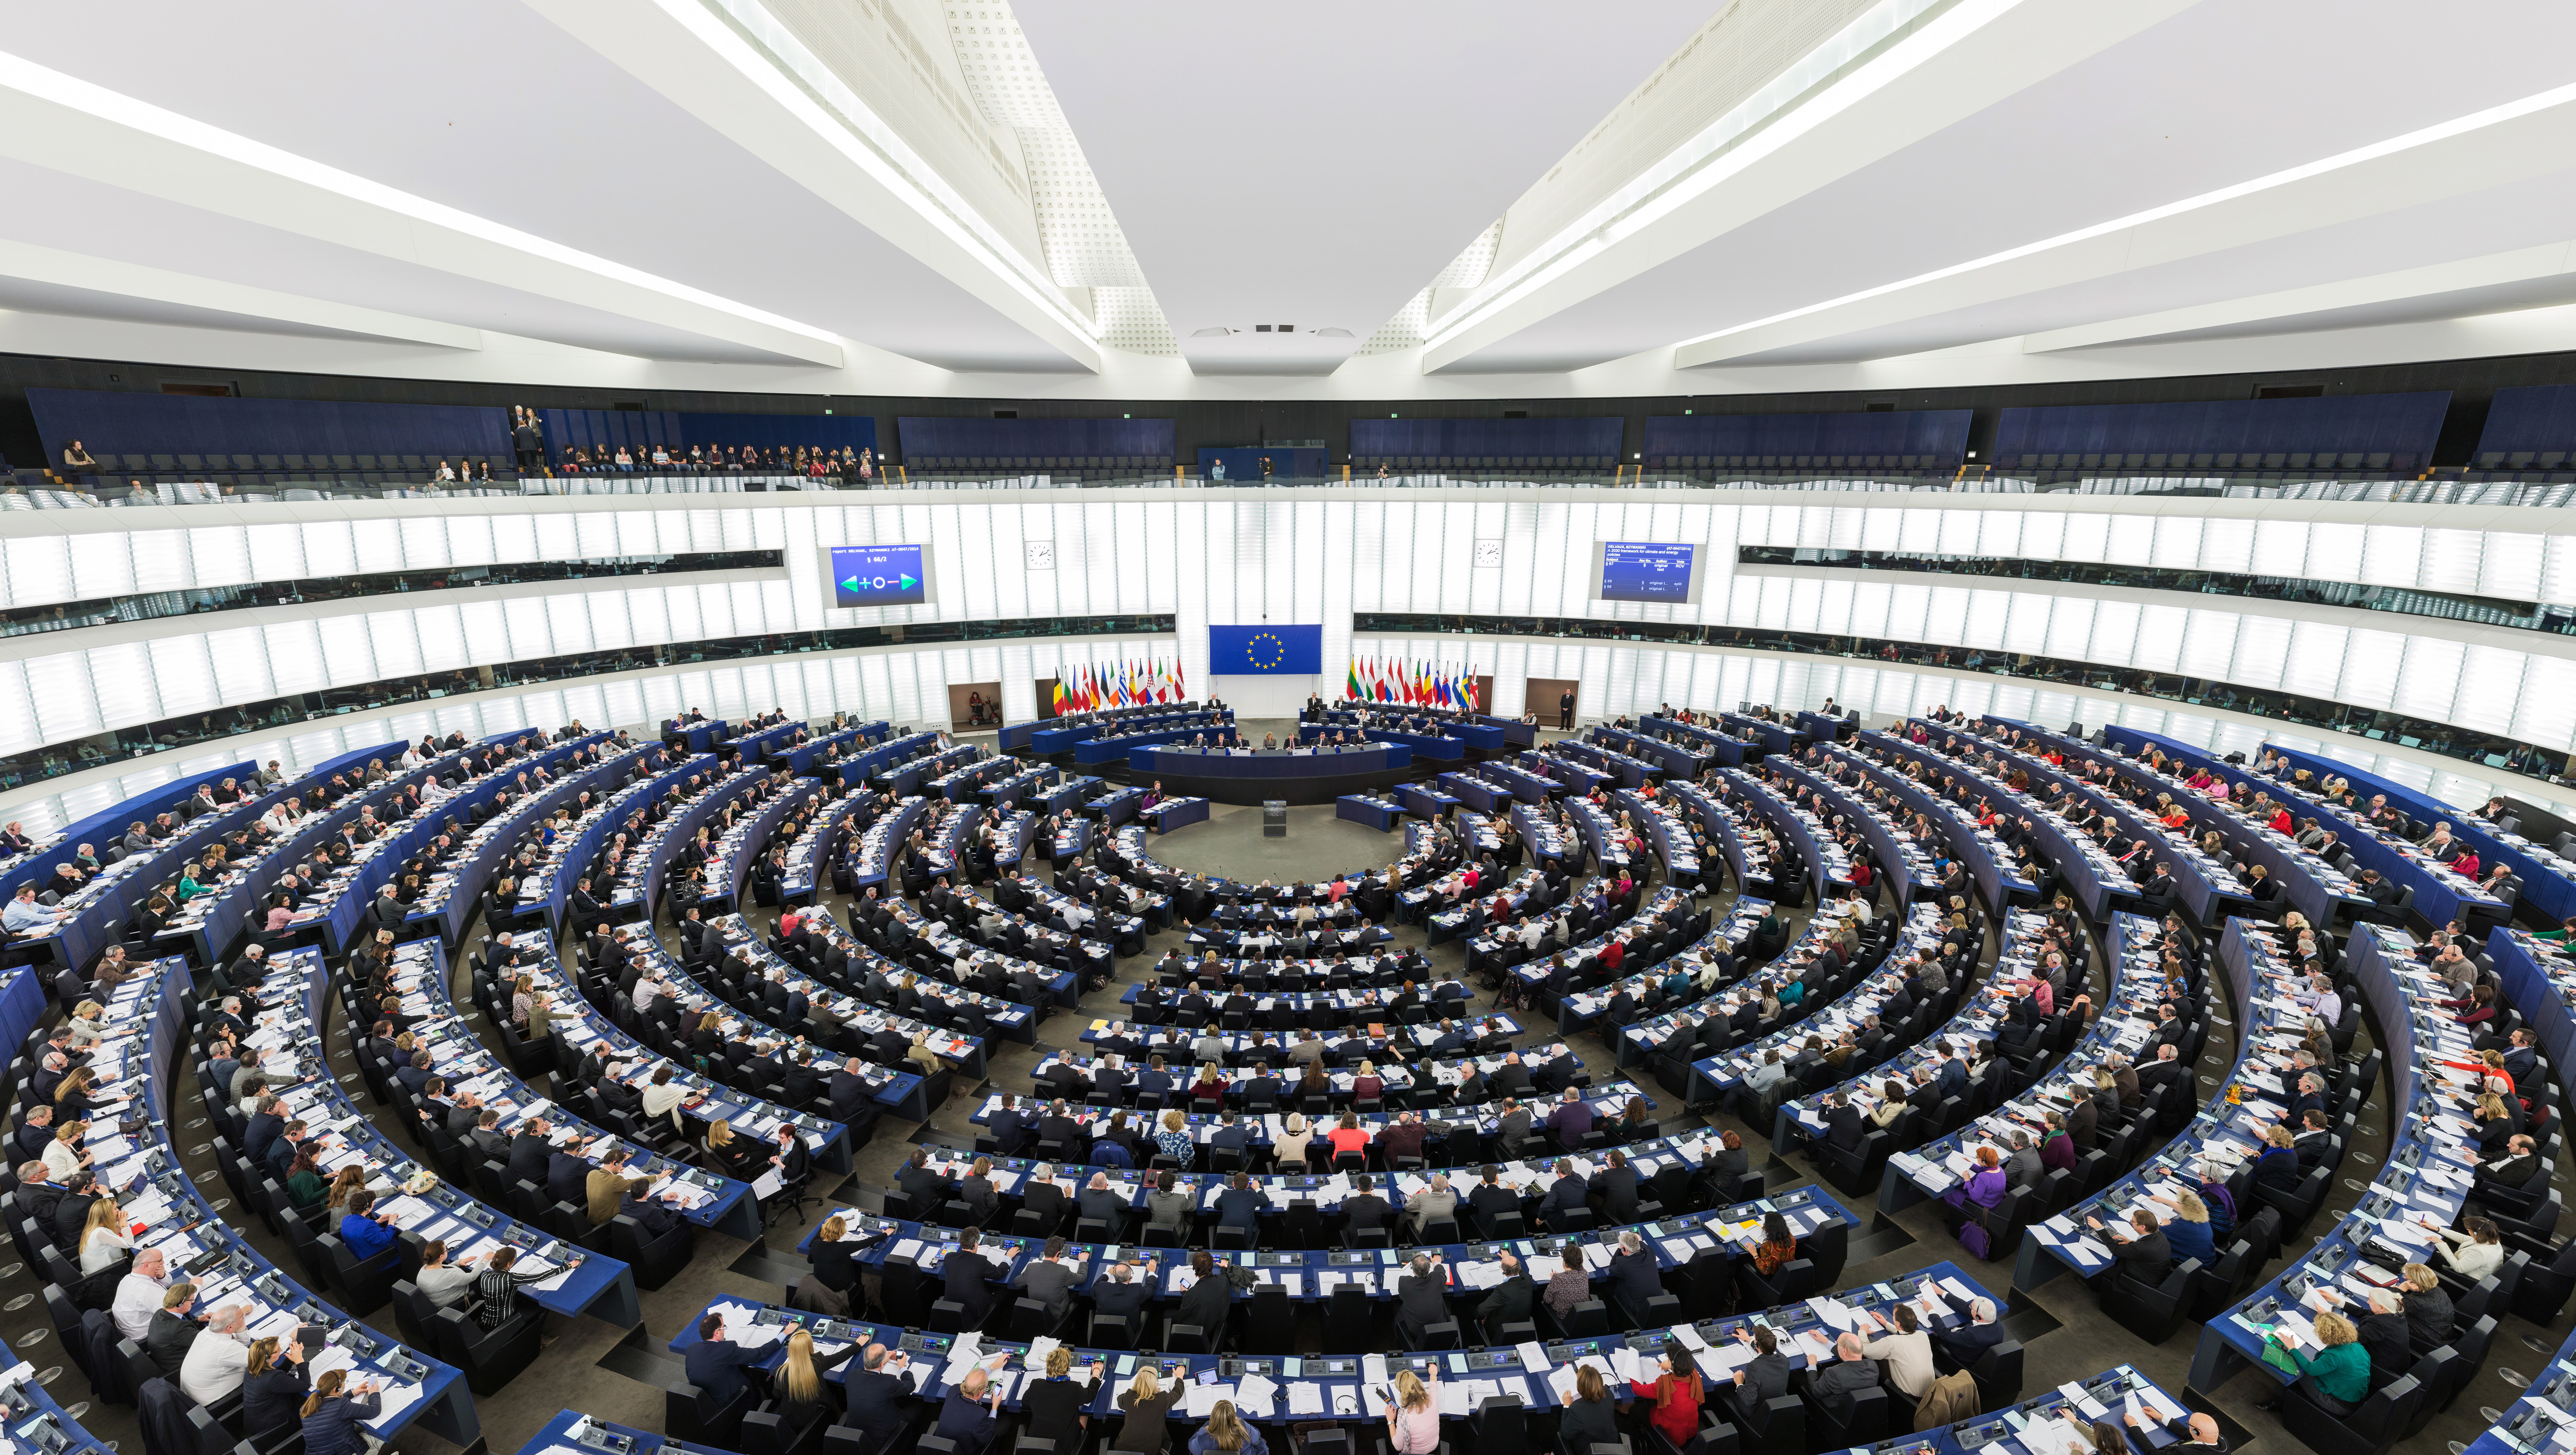 The European Parliament refused to approve funding for the EU Council until Ukraine is provided with new Patriots